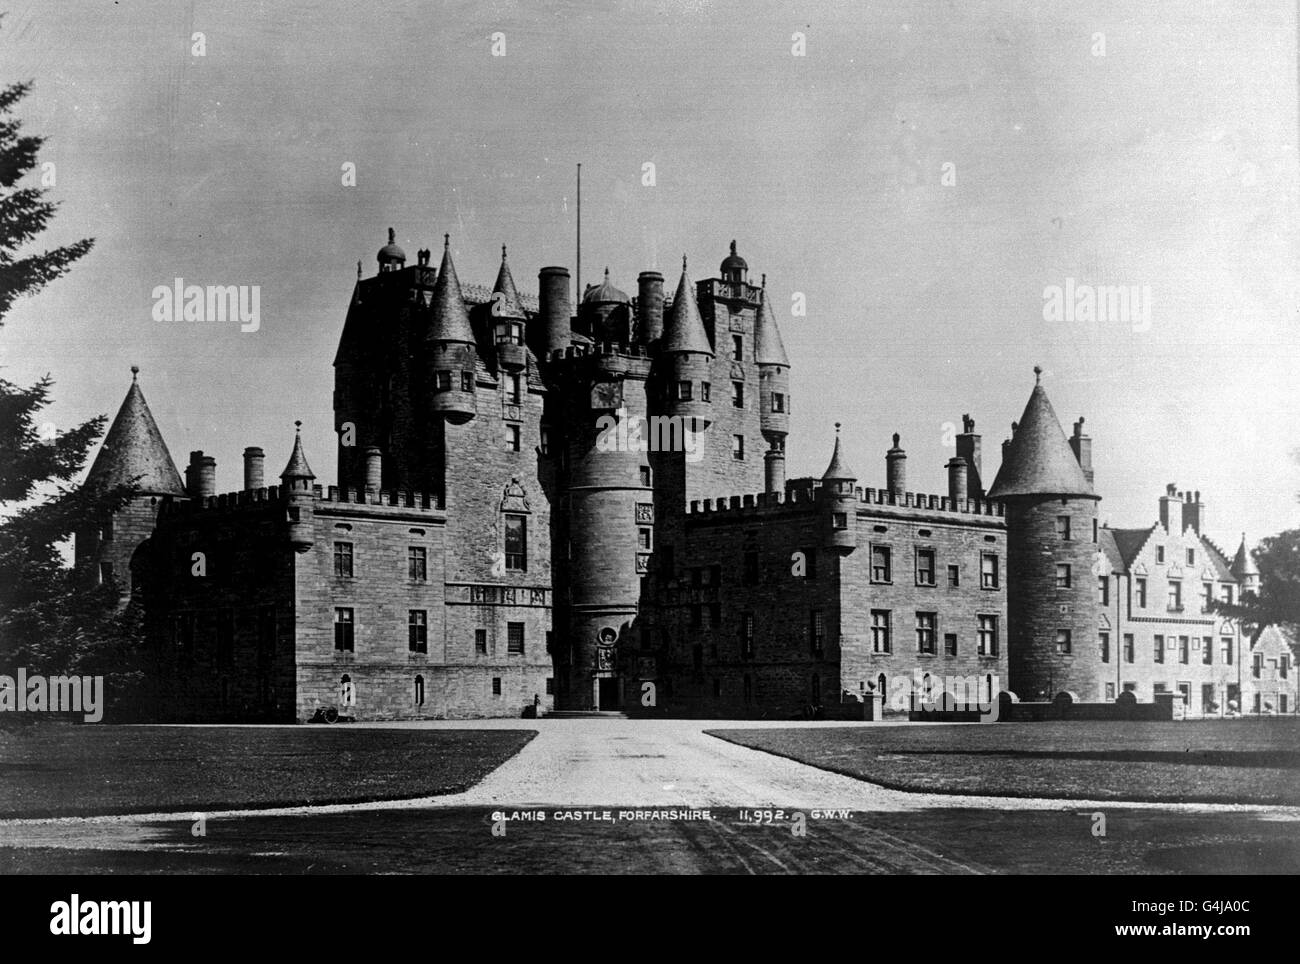 PA NEWS PHOTO 18/1/23 A LIBRARY FILE PICTURE OF GLAMIS CASTLE IN ANGUS, BIRTH PLACE OF PRINCESS MARGARET AND SEAT OF THE FAMILY OF LADY ELIZABETH BOWES-LYON (LATER THE QUEEN MOTHER). Stock Photo